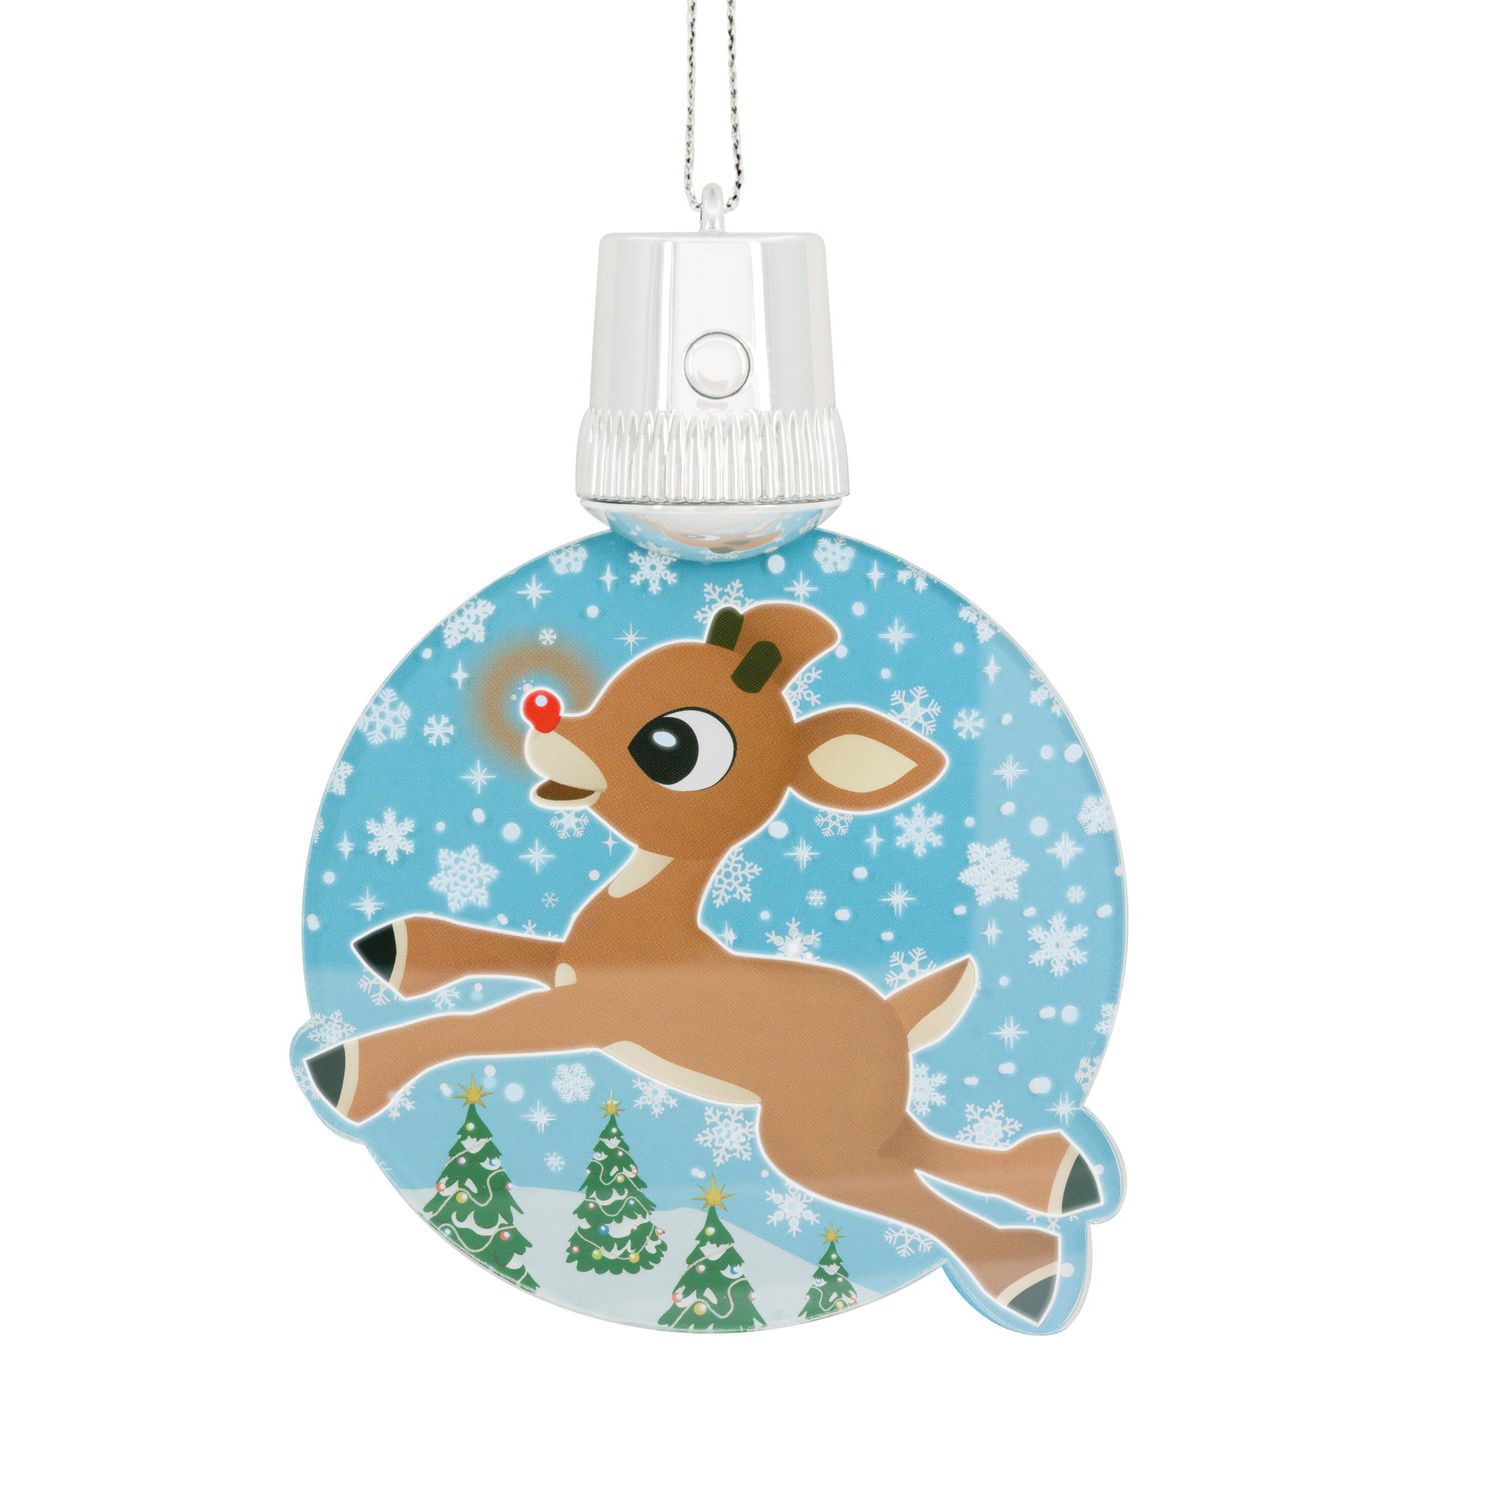 Details about   Hallmark Rudolph the Red Nosed Reindeer Christmas Ornament 2019 Holiday 